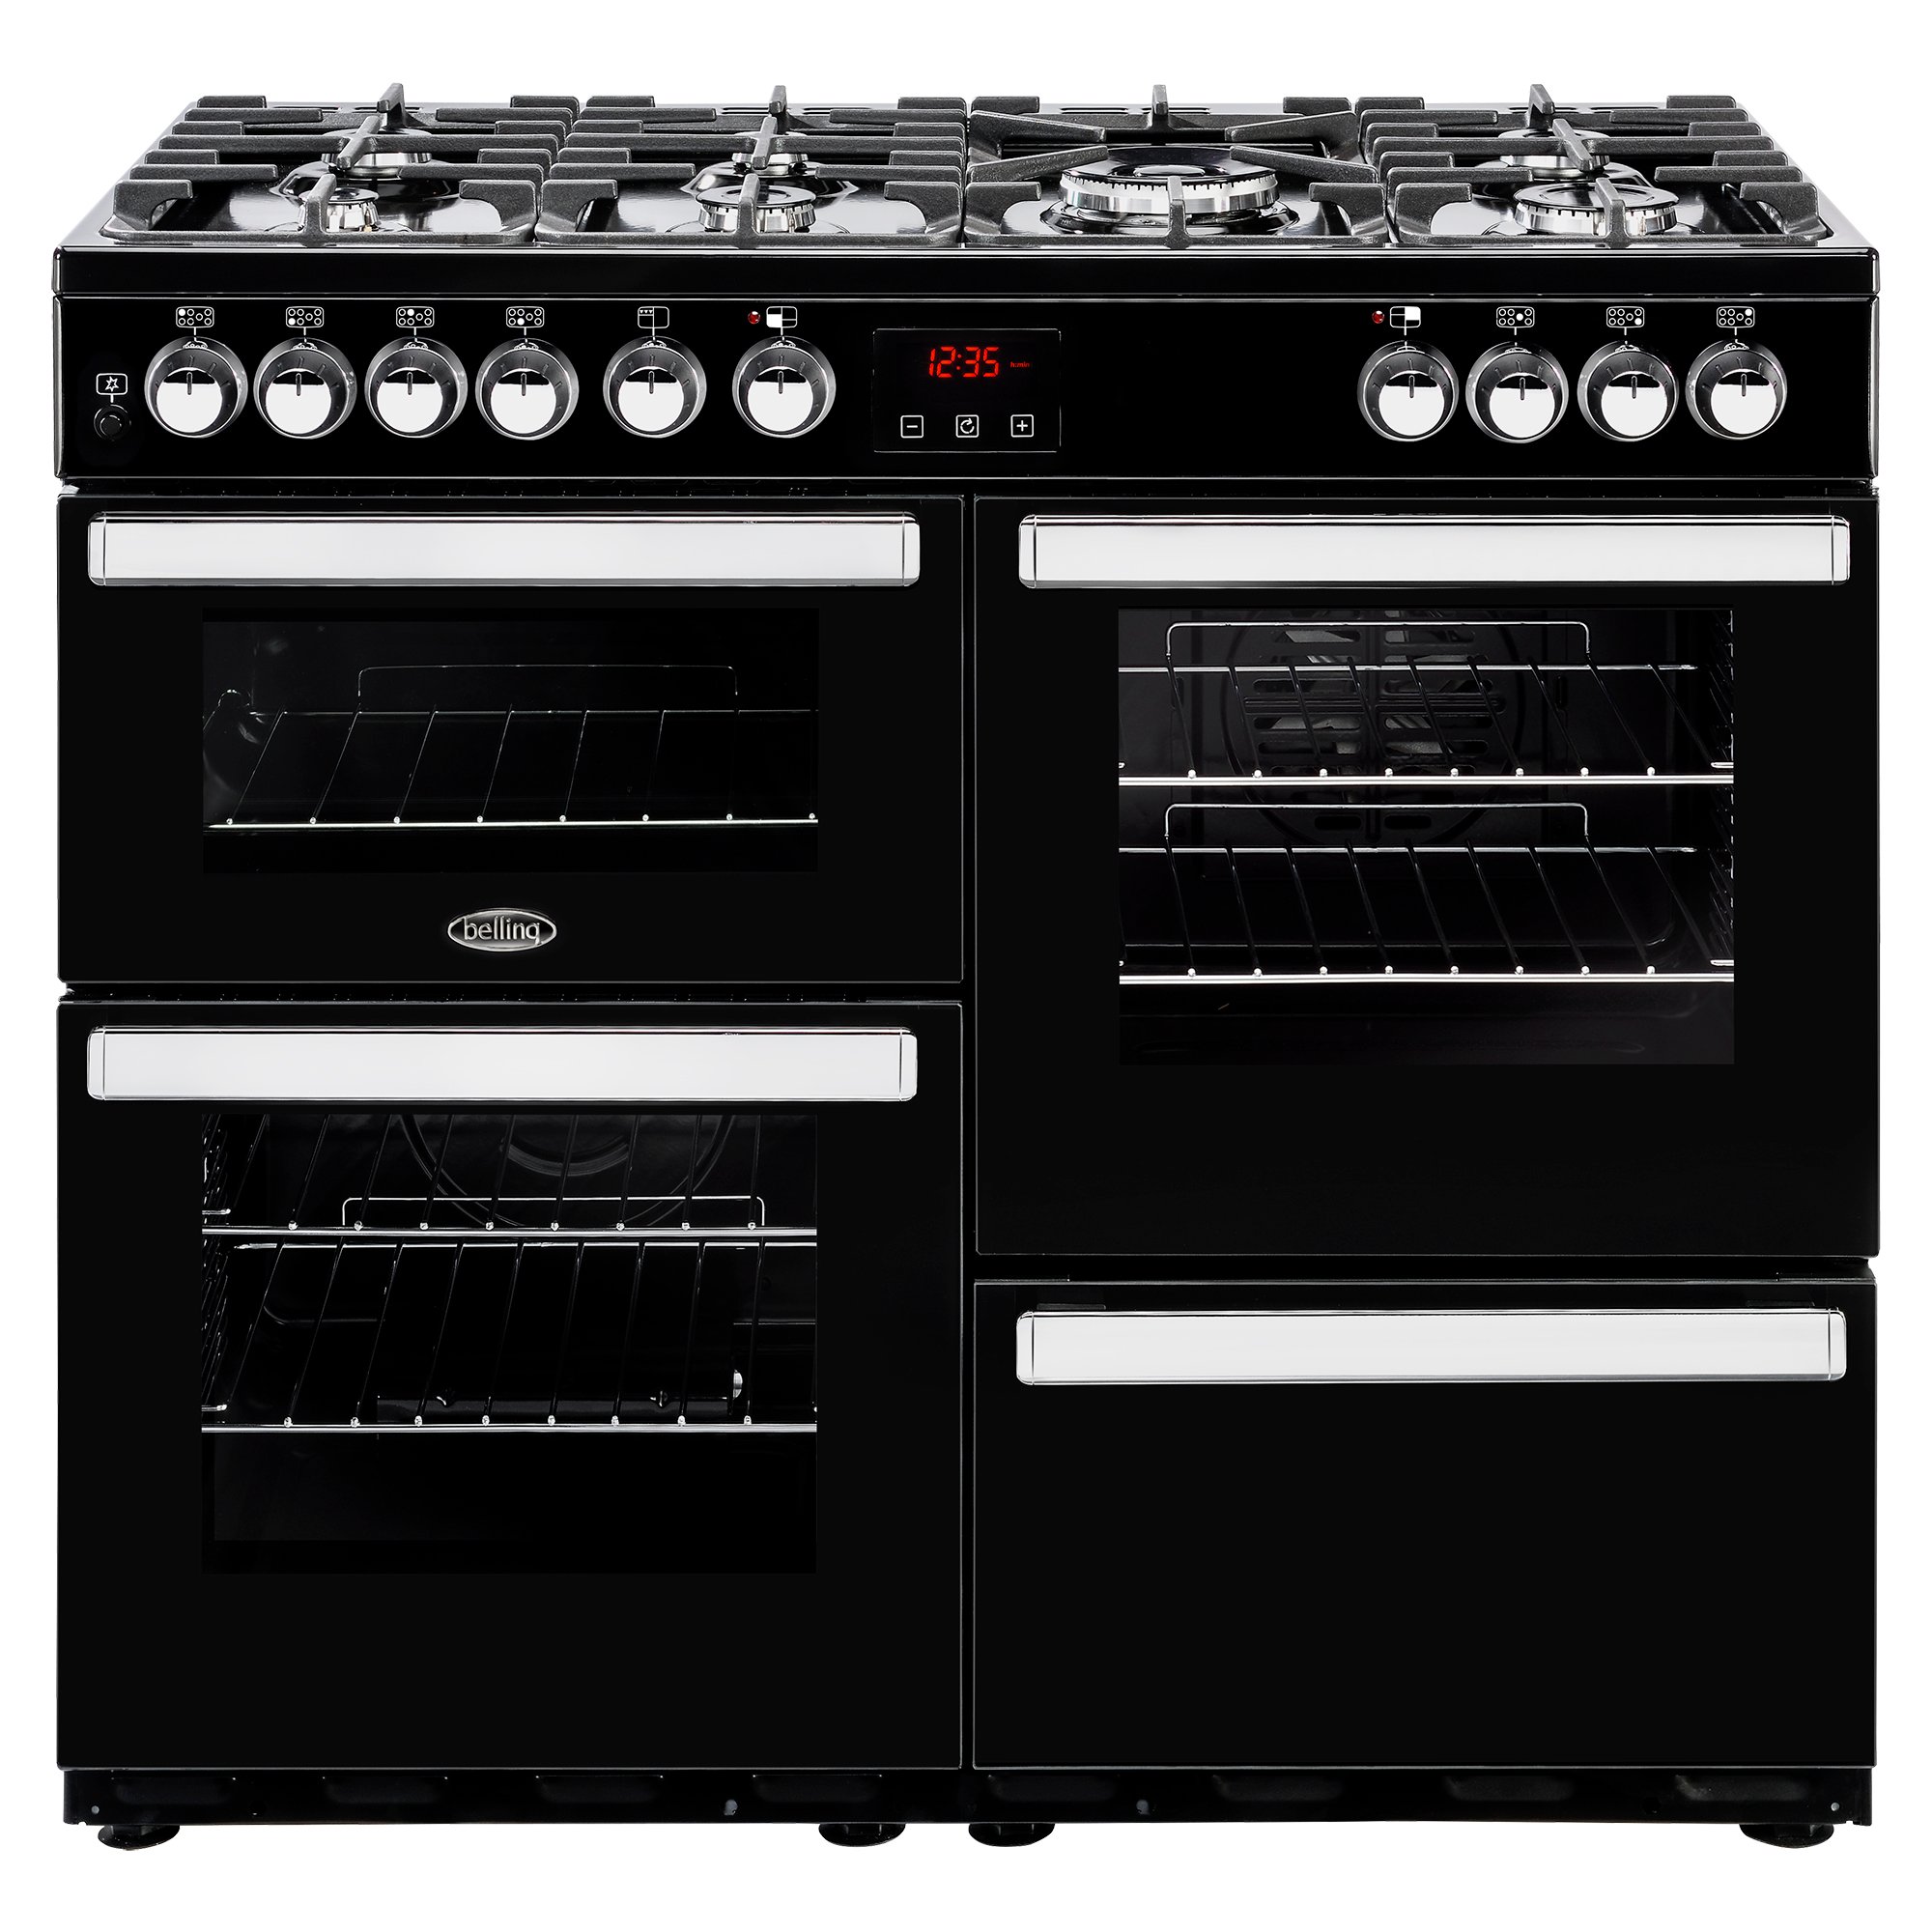 100cm dual fuel range cooker with 7 burner gas hob, 4kW PowerWok, Cast Iron Pansure Supports, Maxi-Clock and easy clean enamel.